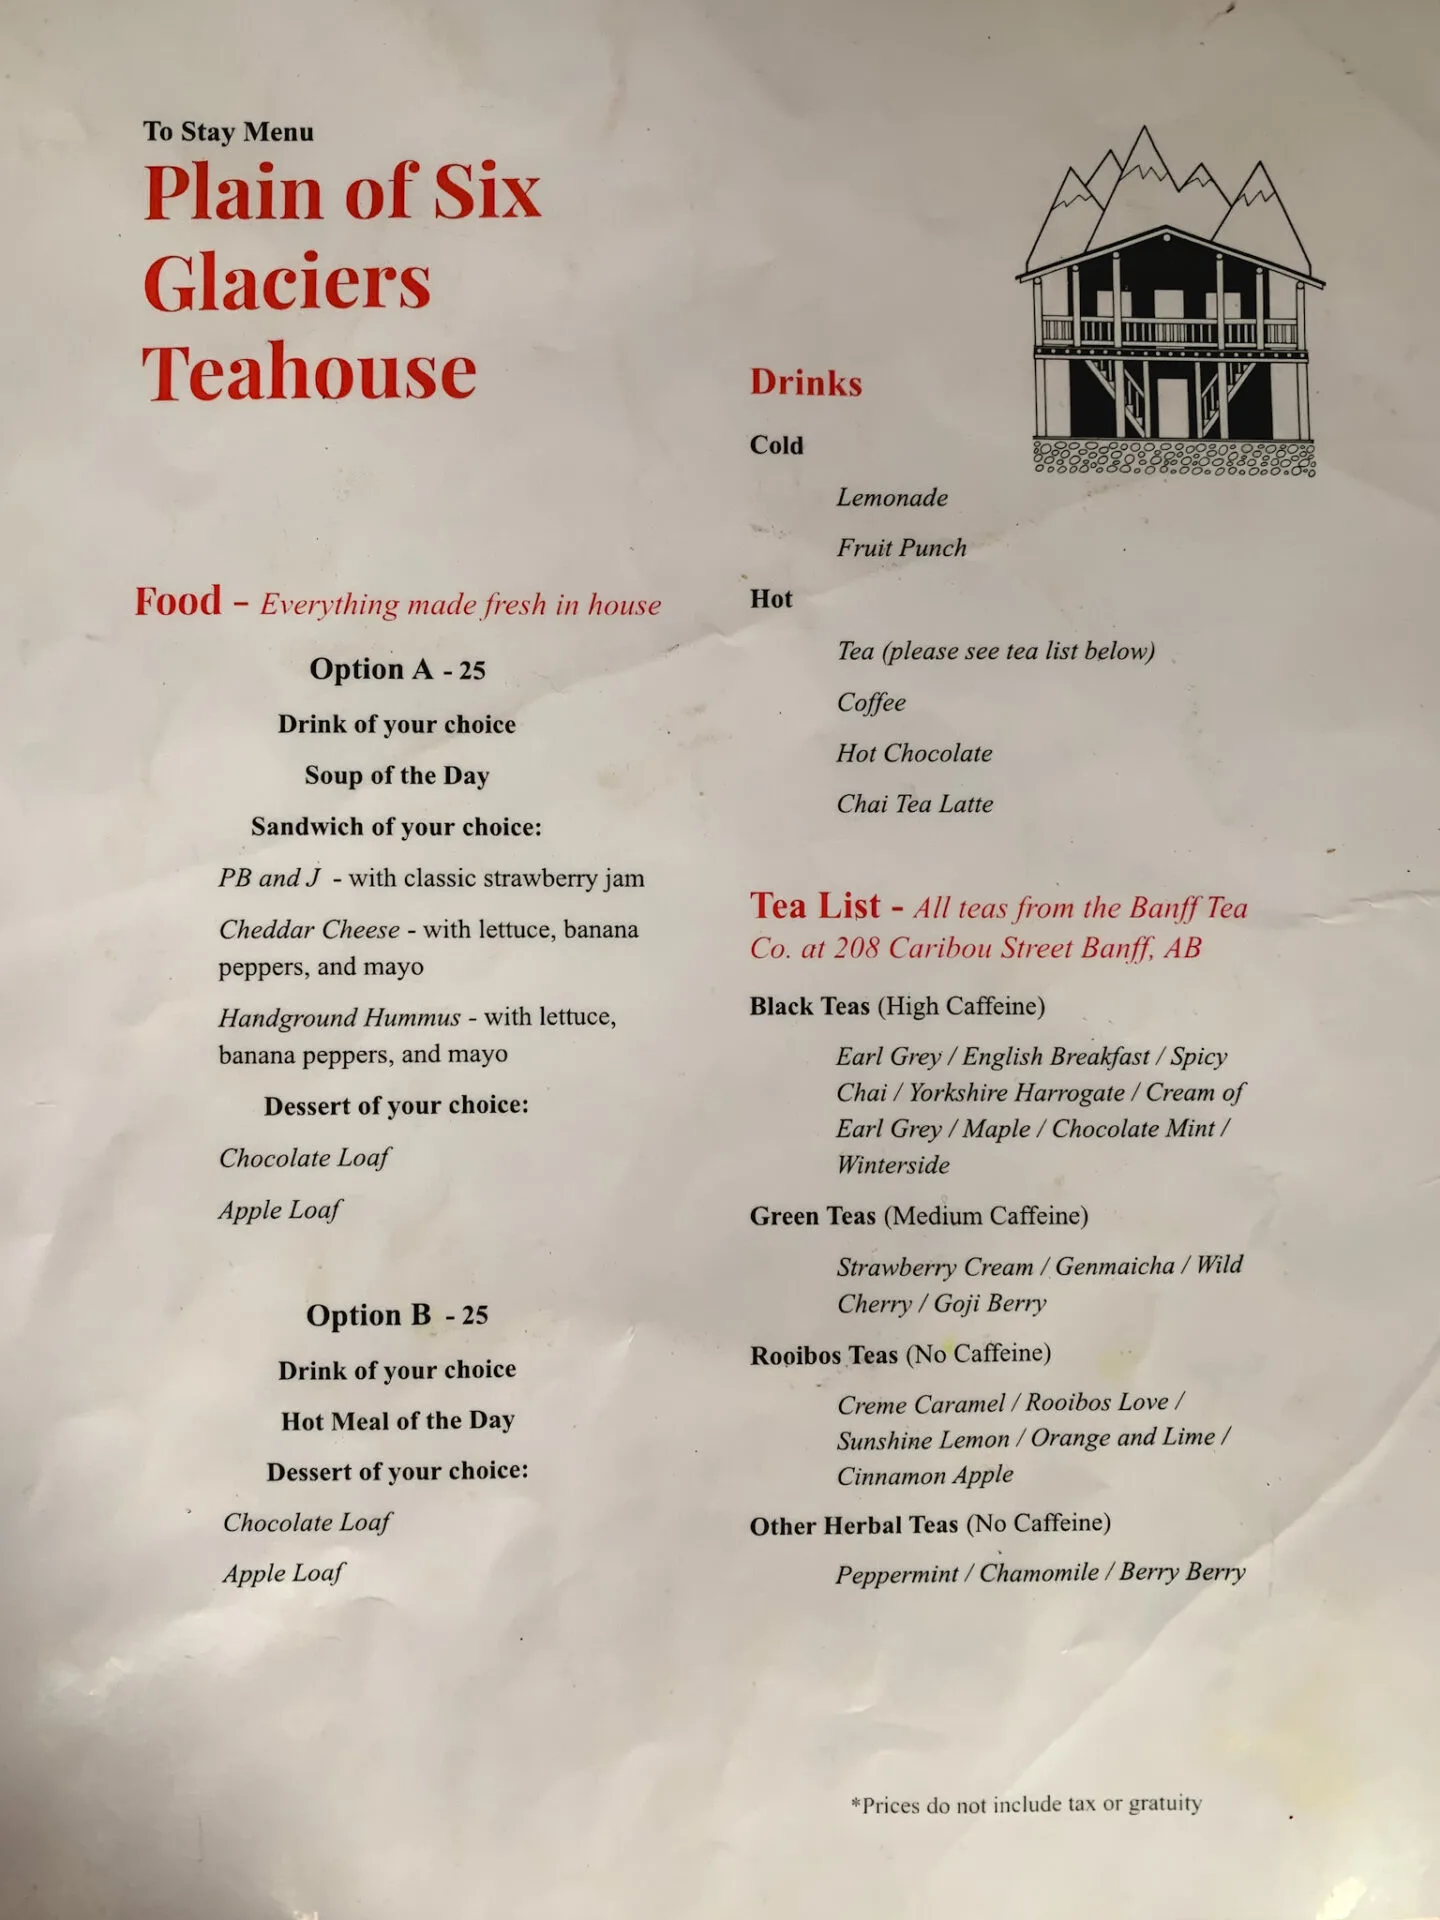 Menu at the Plain of the Six Glaciers Teahouse in Lake Louise, Alberta